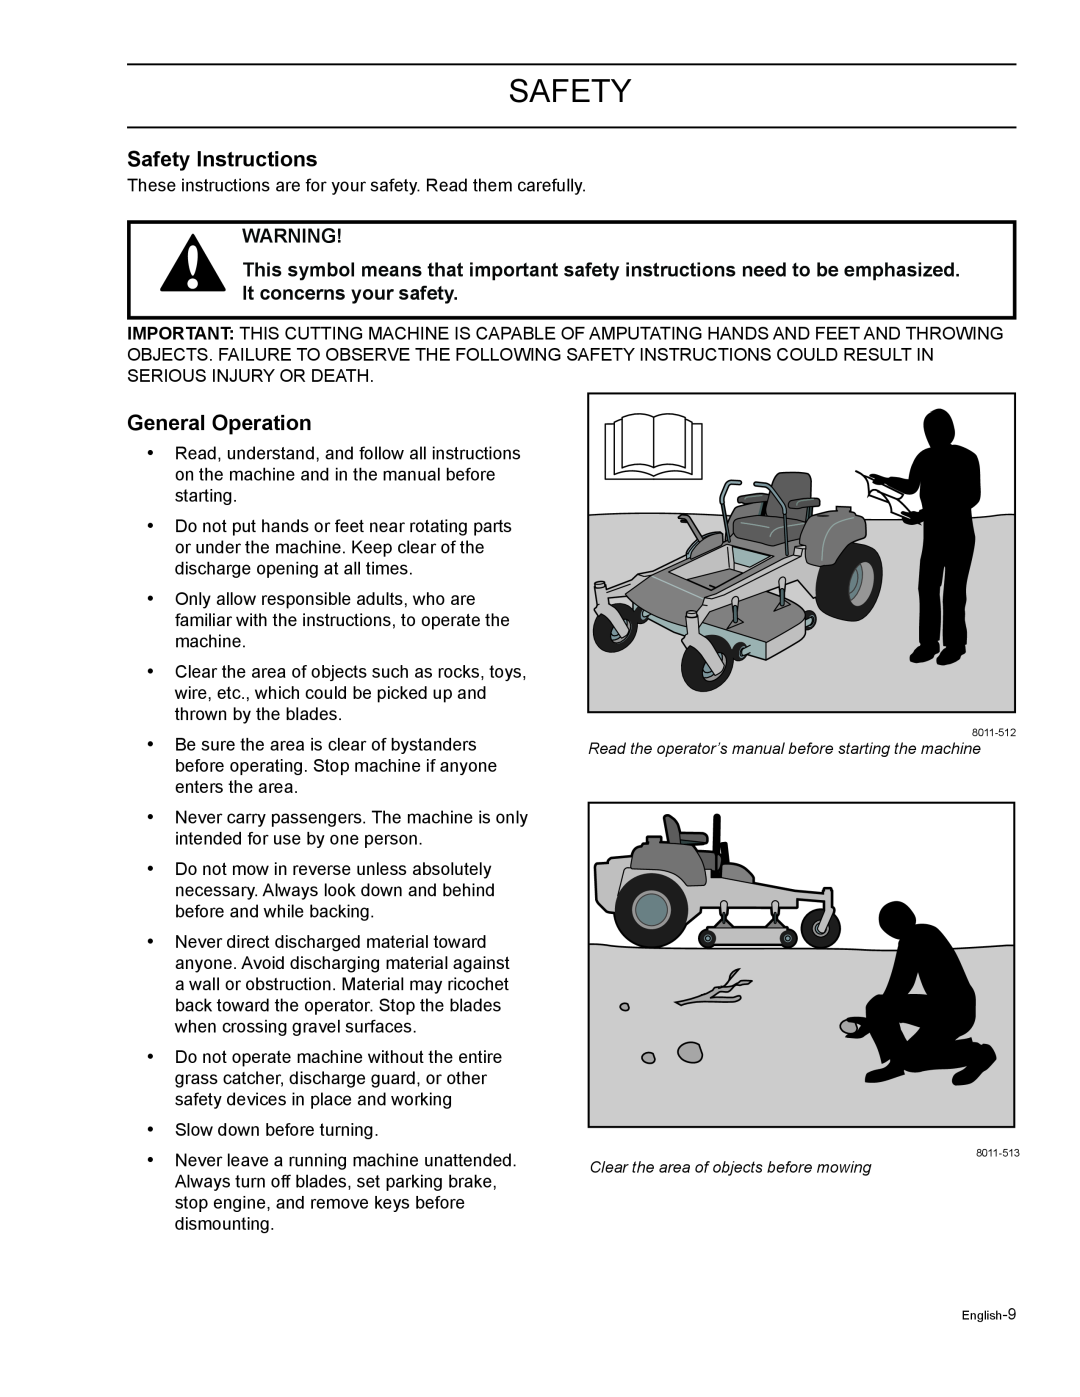 HTC Z4219BF, Z5426BF, Z4220BF, Z4824BF, Z4619BF manual Safety Instructions, General Operation 